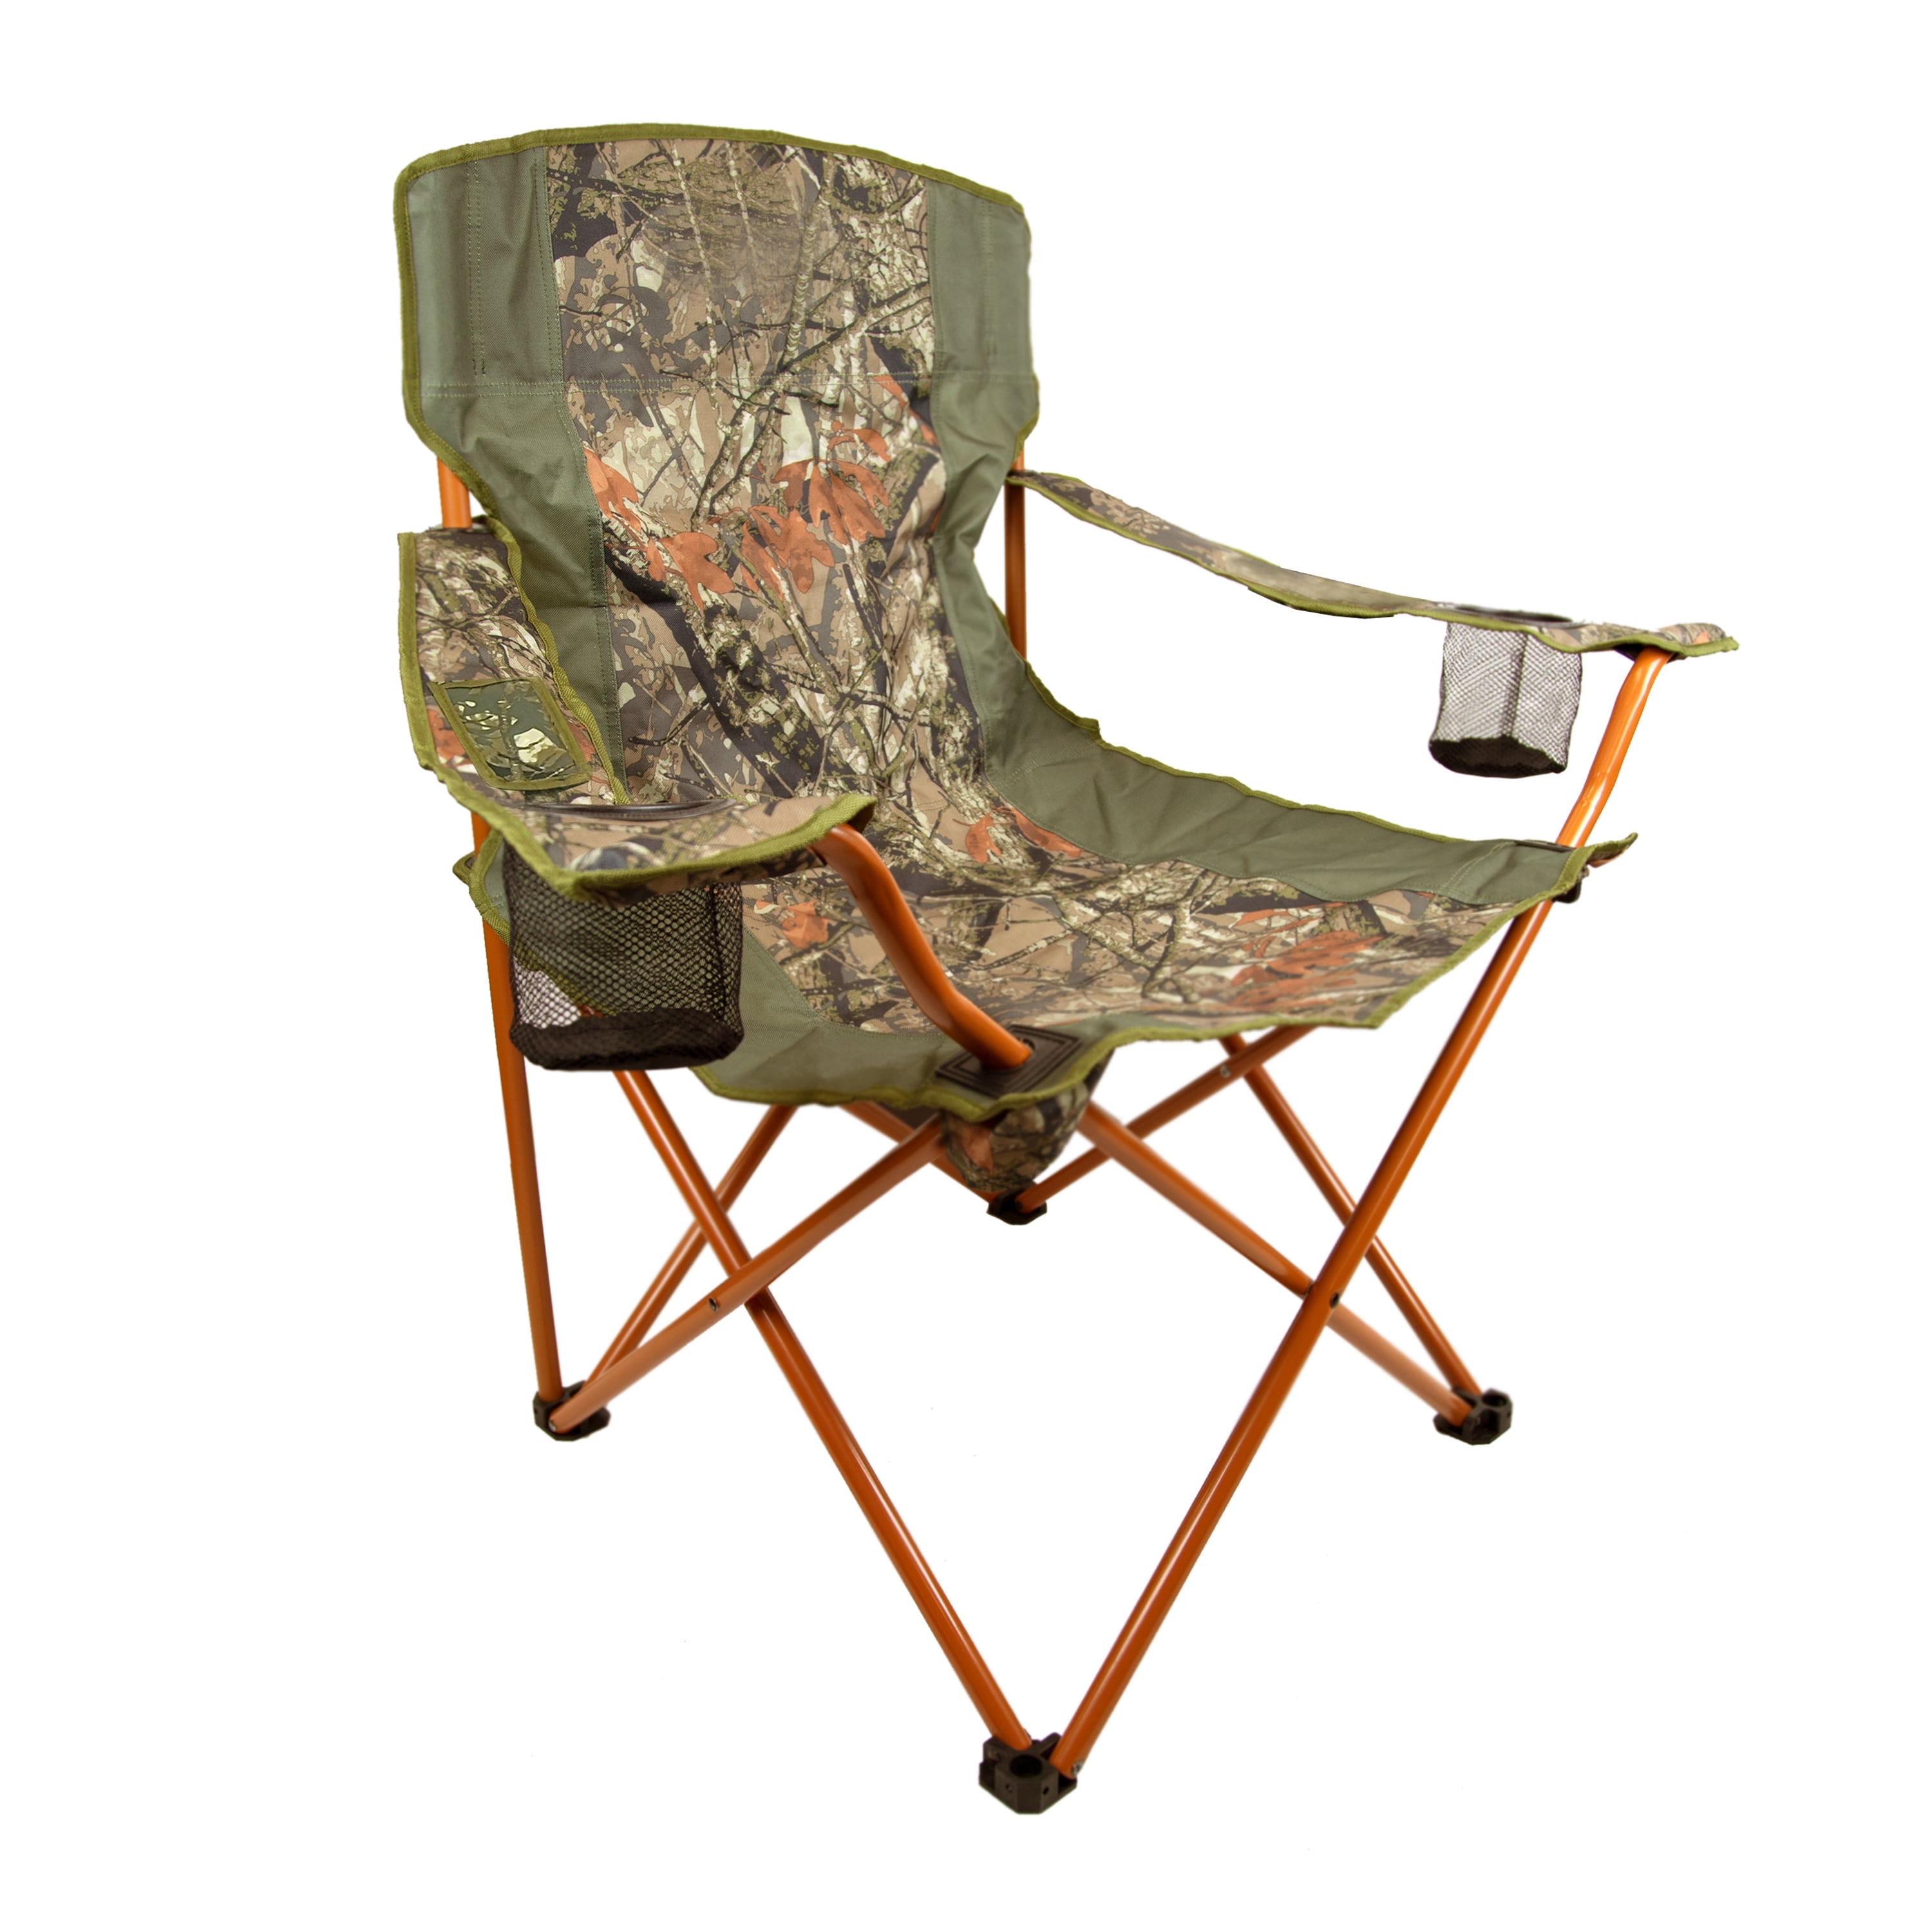 26.20" W × 25.50" D × 38.20" H Dimensions Hard Arm Camo Chair for Outdoor New 